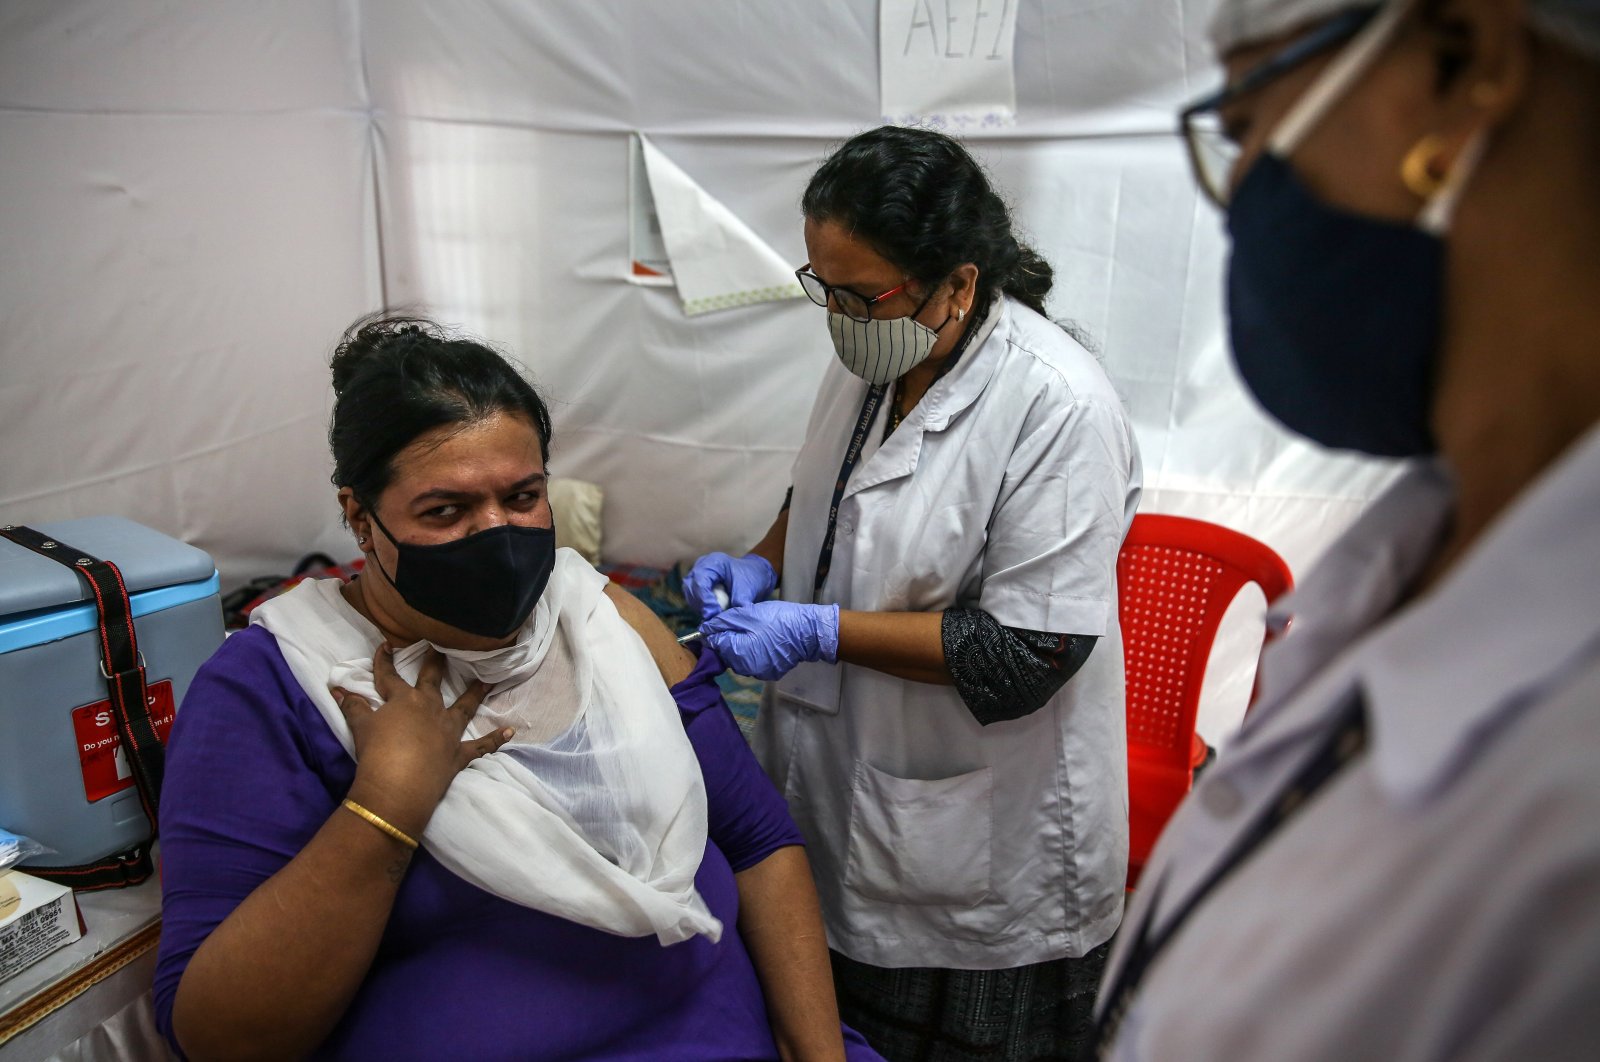 A person gets a dose of a COVID-19 vaccine at a vaccination center in Mumbai, India, Aug. 27, 2021. (EPA Photo)